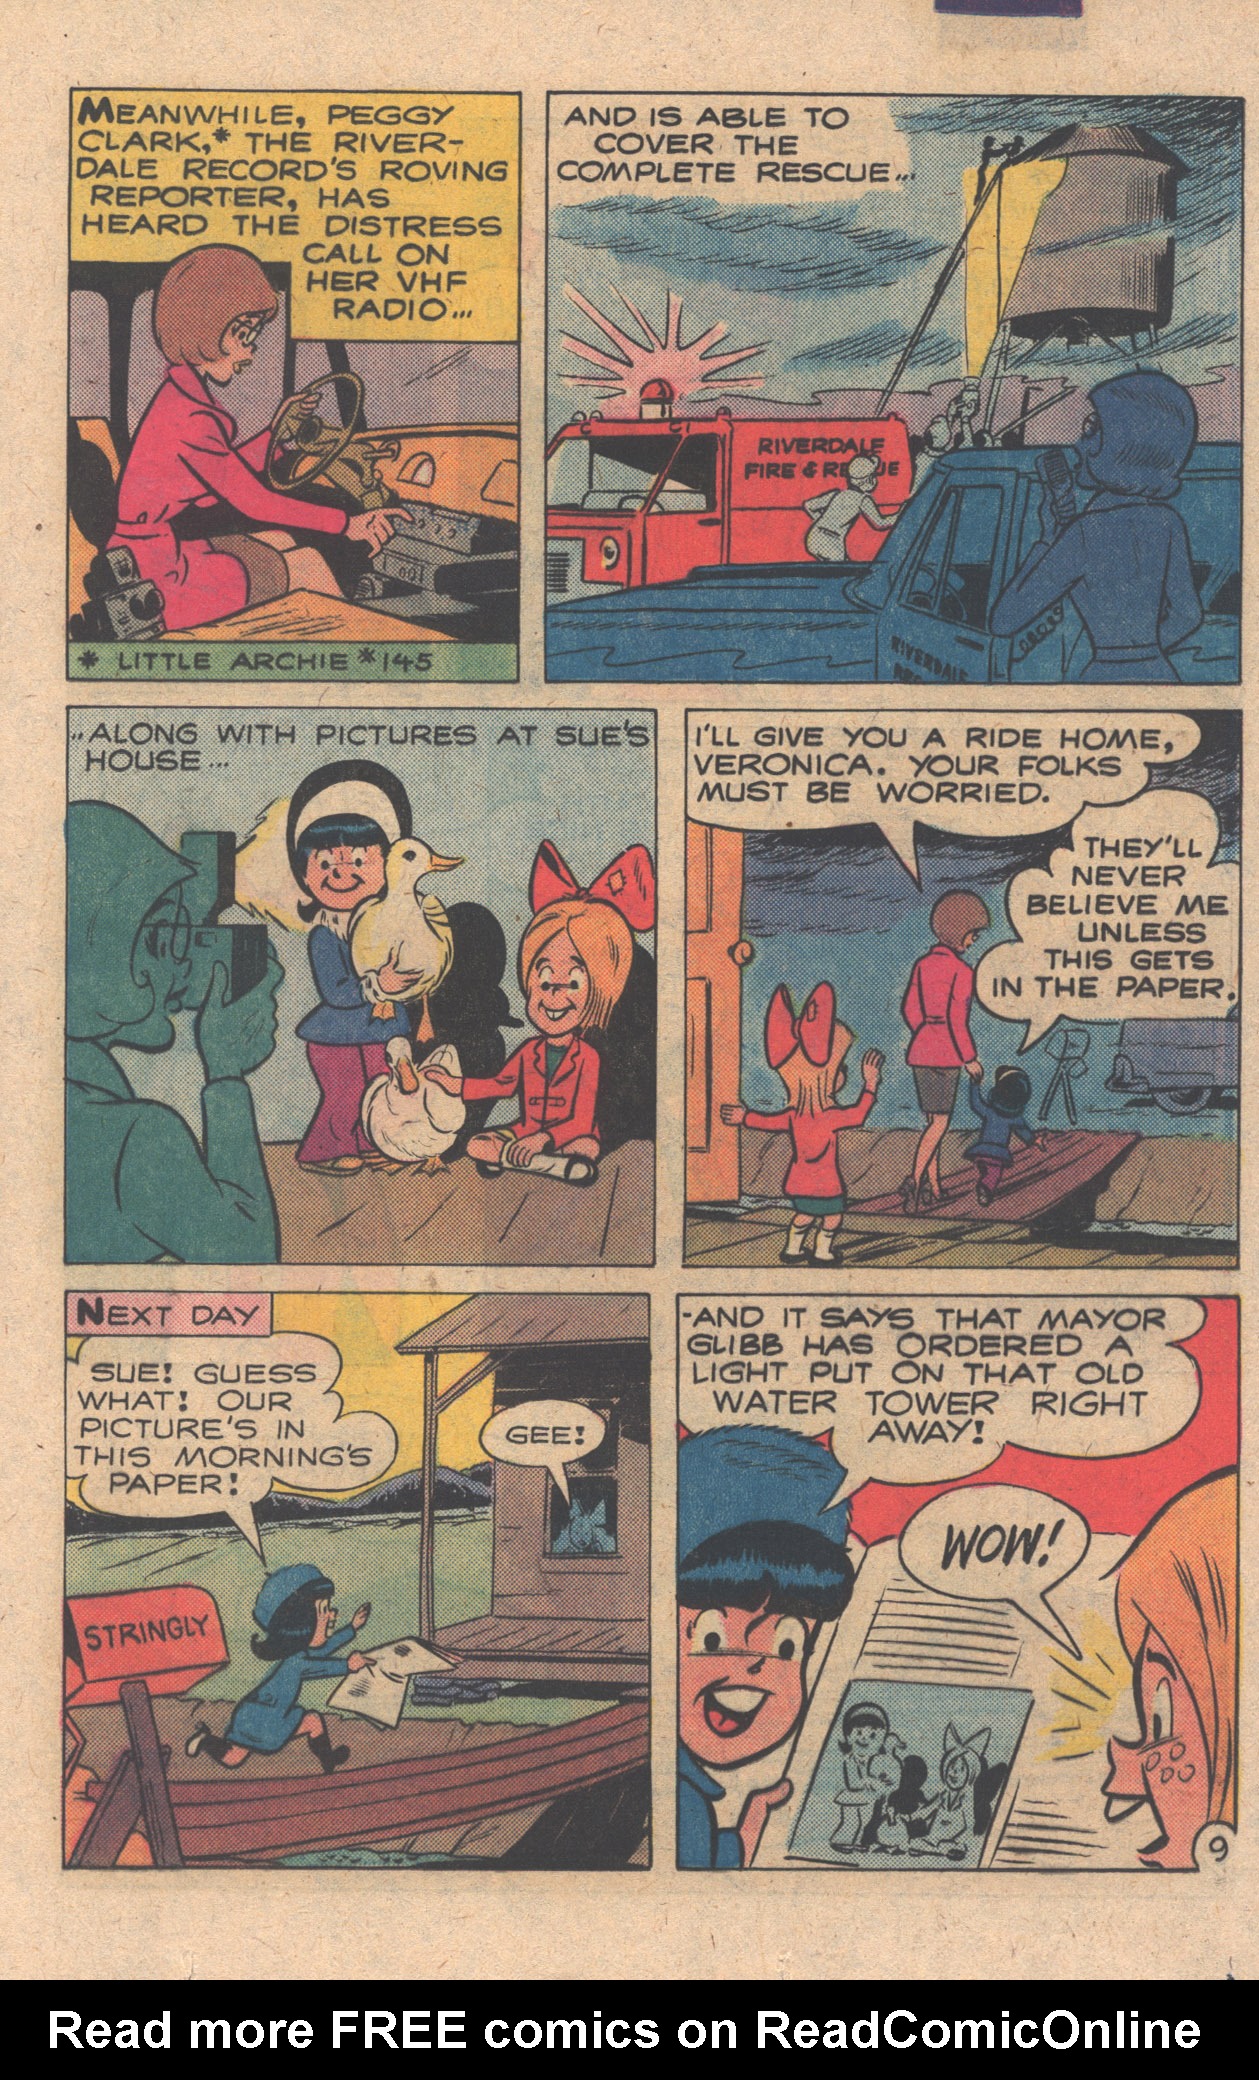 Read online The Adventures of Little Archie comic -  Issue #163 - 21